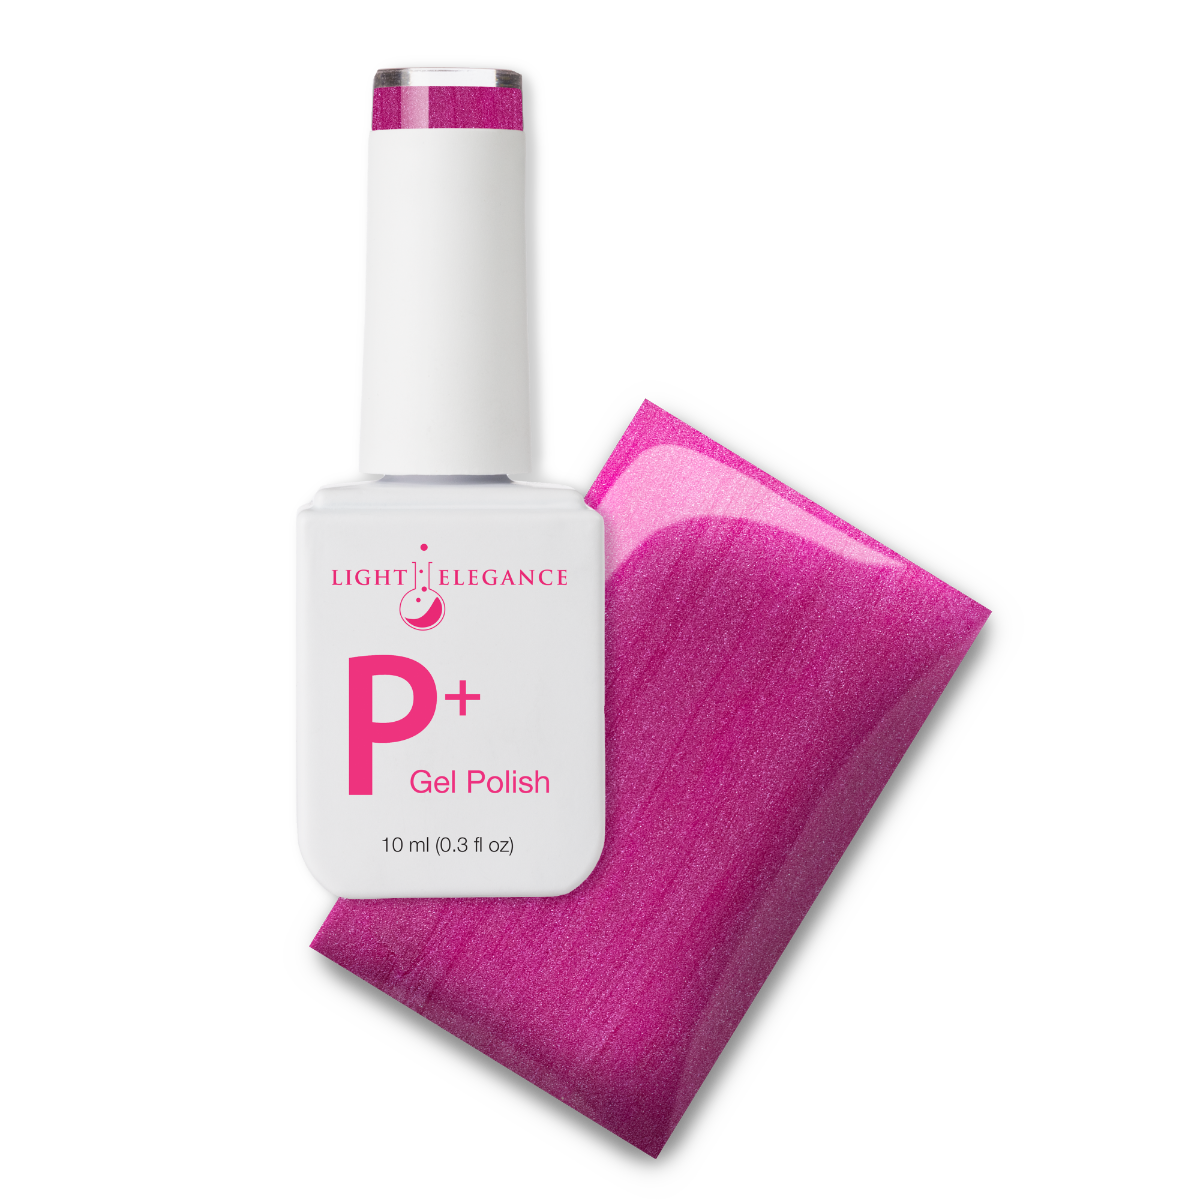 Light Elegance P+ Soak Off Color Gel - Predator in Pink :: New Packaging - Creata Beauty - Professional Beauty Products